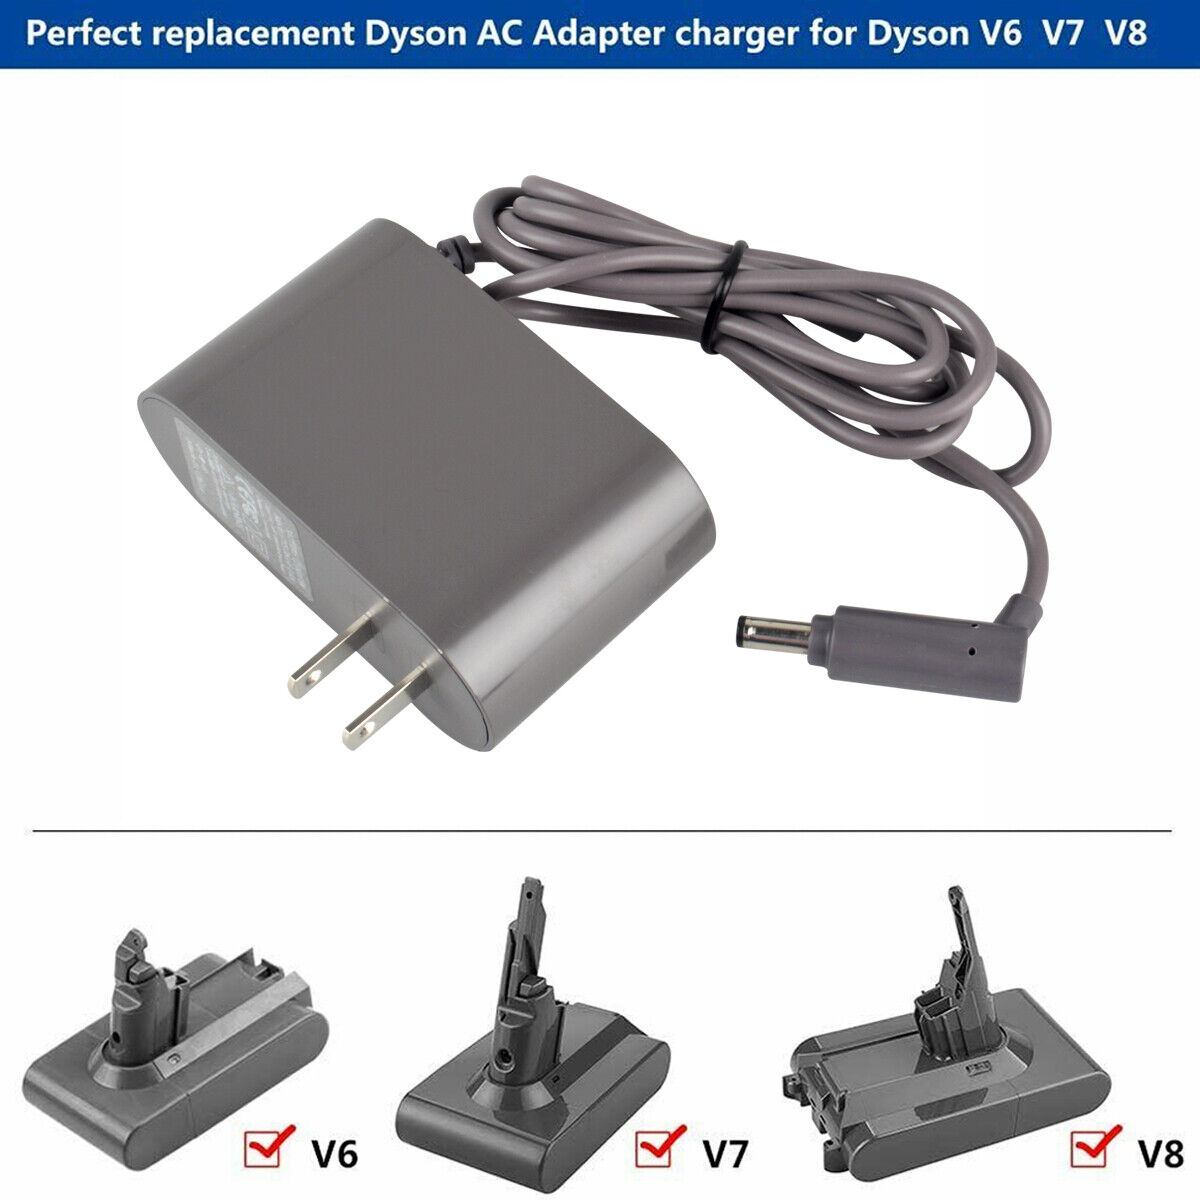 For Dyson Charger Cordless V6 V7 V8 Animal Absolute Power Adapter Battery Supply Compatible Model: For Dyson V6, For